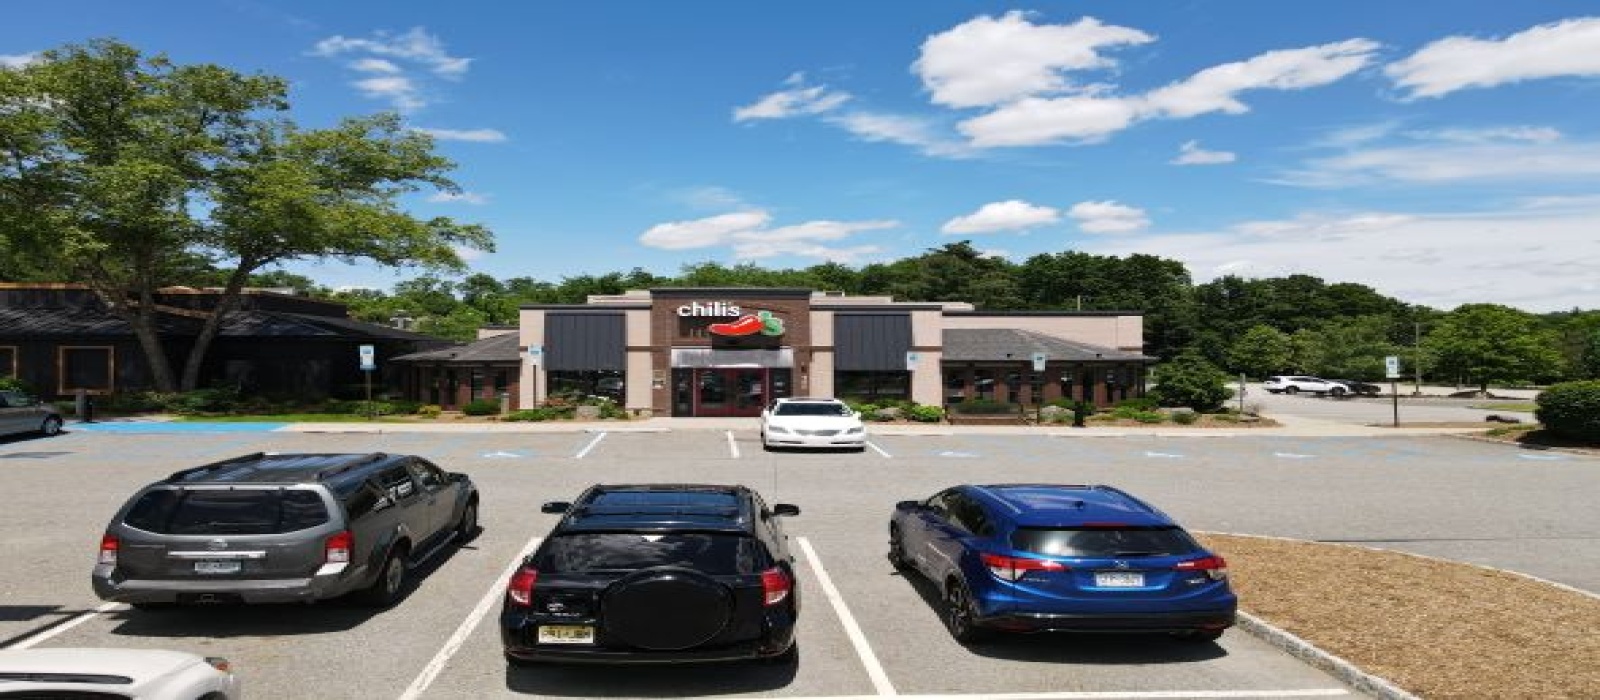 900 State Route 17, Ramsey, New Jersey 07446, ,Retail,For Sale,900 State Route 17,1092